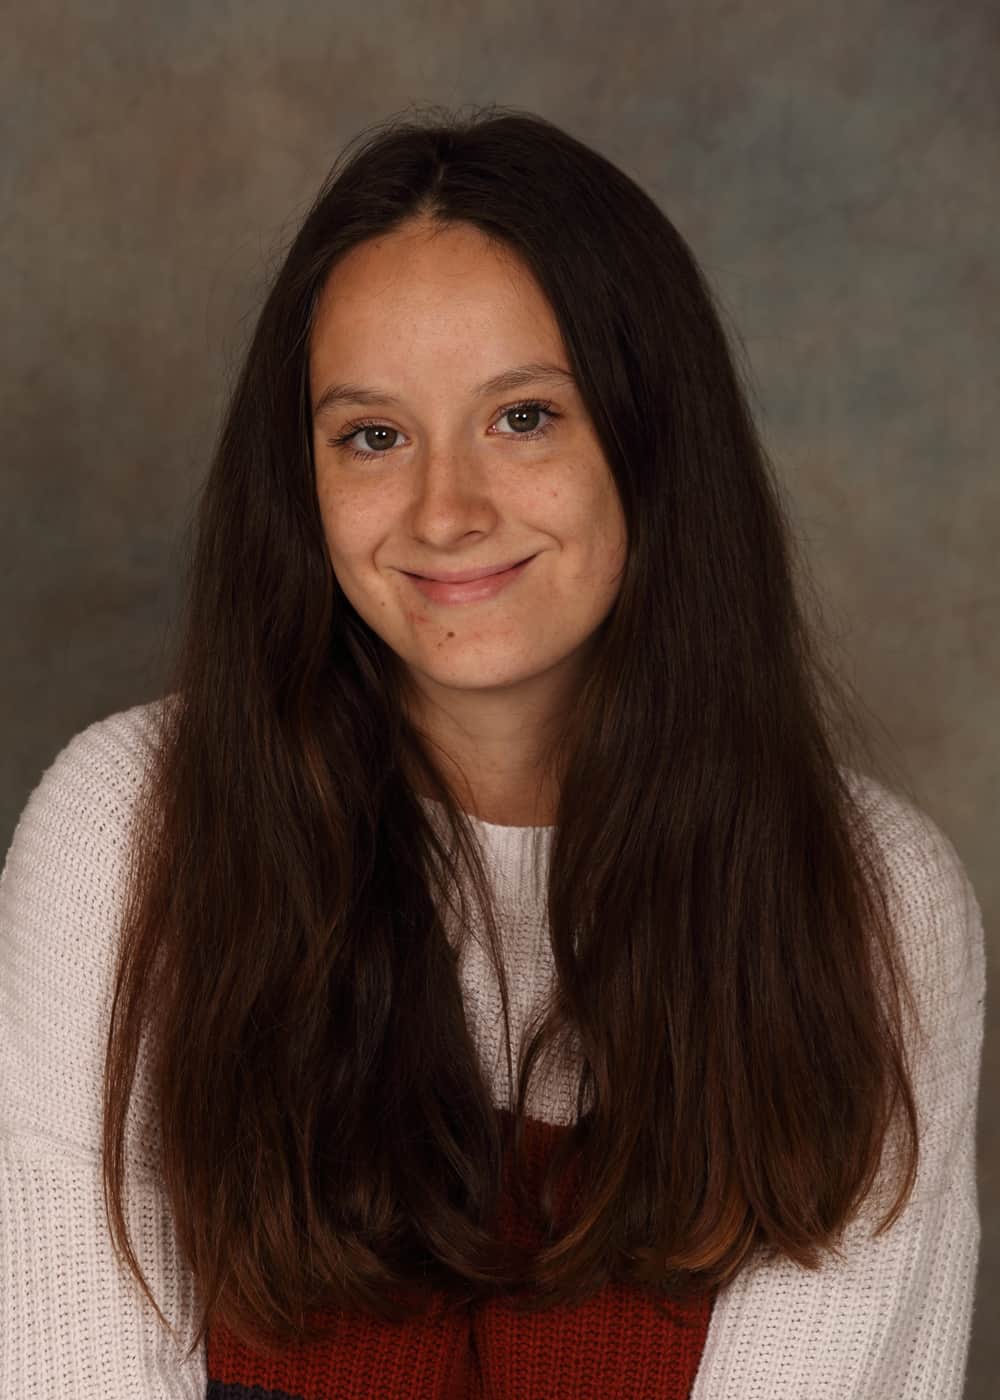 Photo of Co-Teacher Arianna McCorkle. She is a Caucasian woman with long brown hair and green eyes. She is smiling and wears a red and white dress.